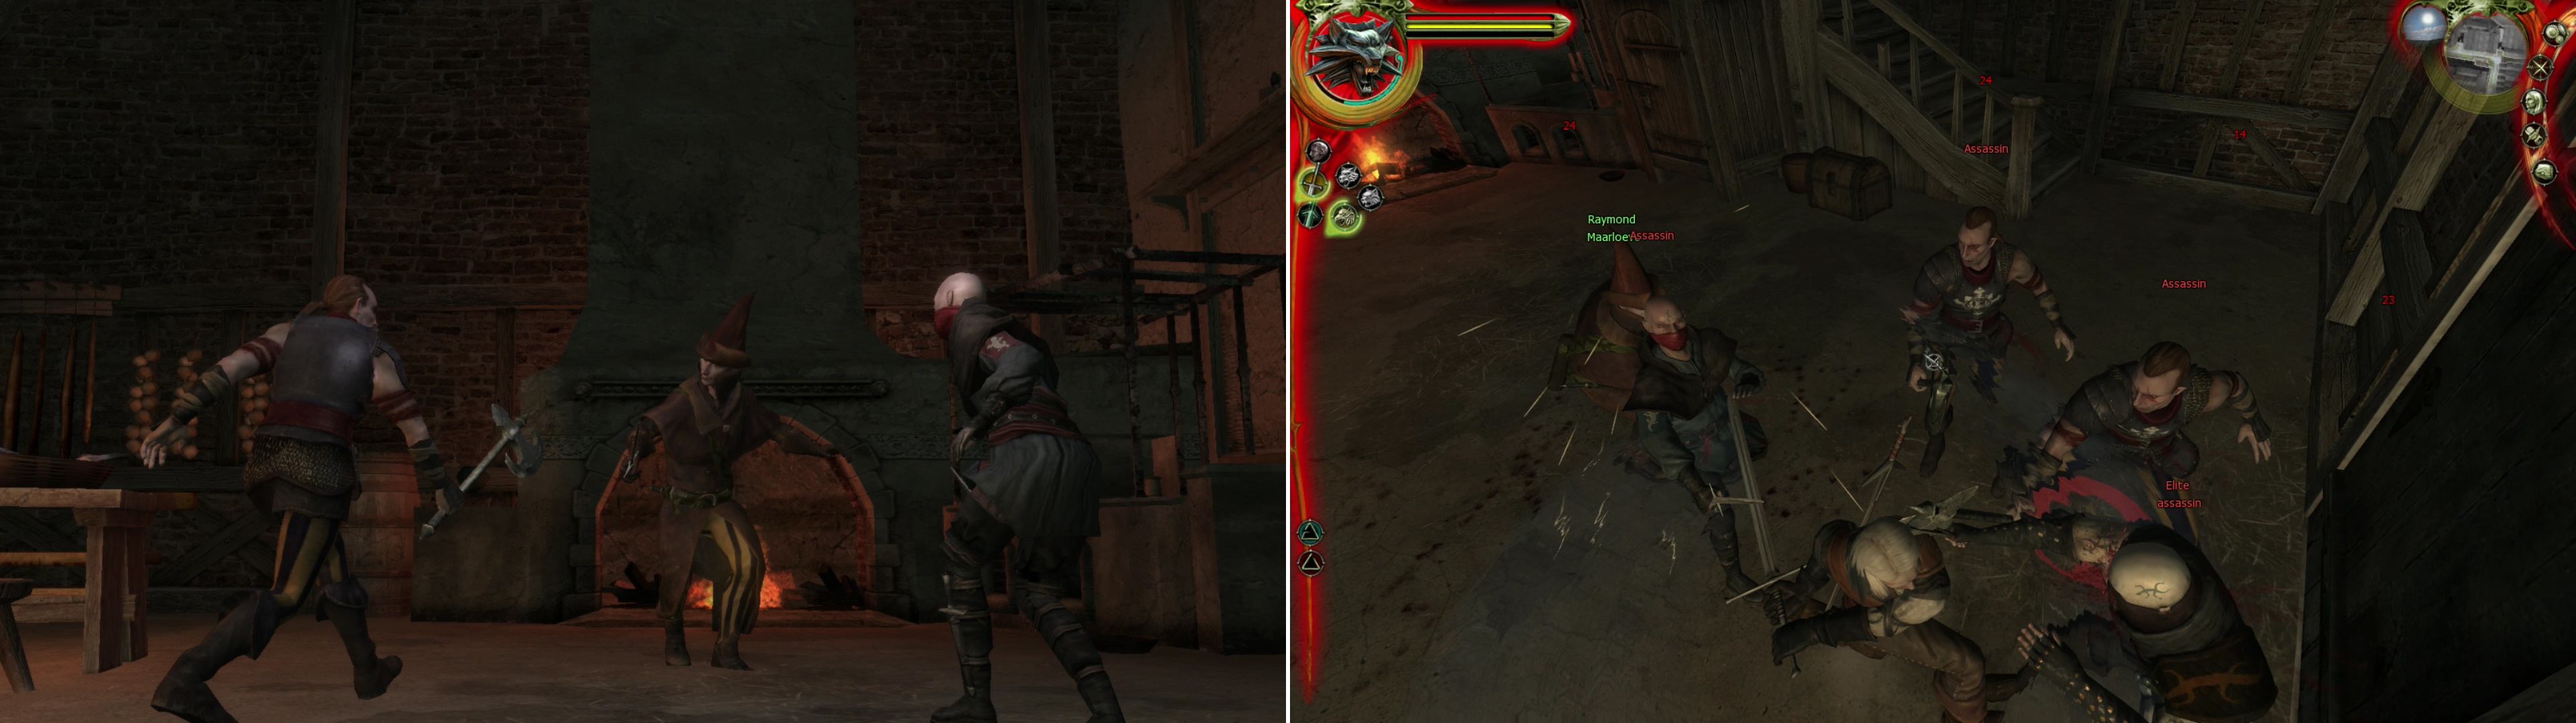 Visit Raymond to find him beset by Salamandra assassins (left). Fortunately he's got a Witcher ally with a good sense of timing on his side (right).